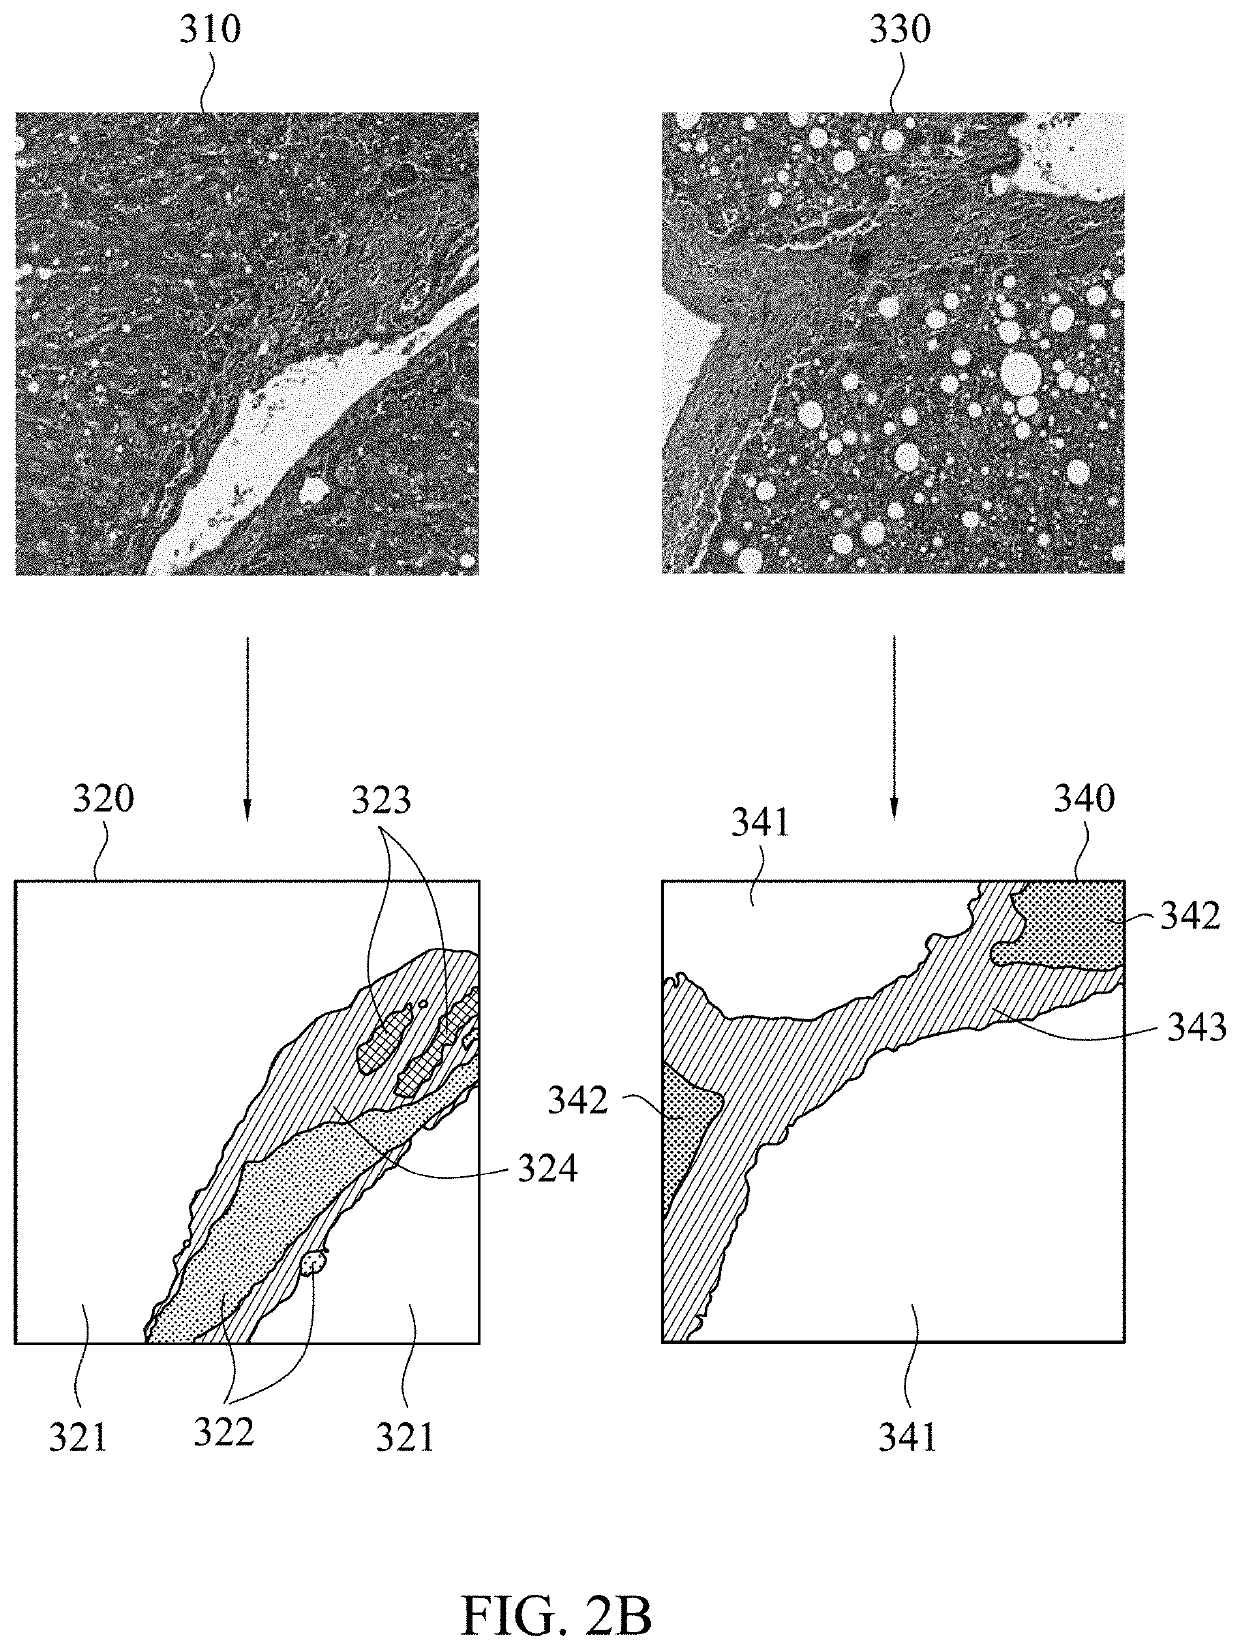 Computer aided method and electrical device for analyzing fibrosis